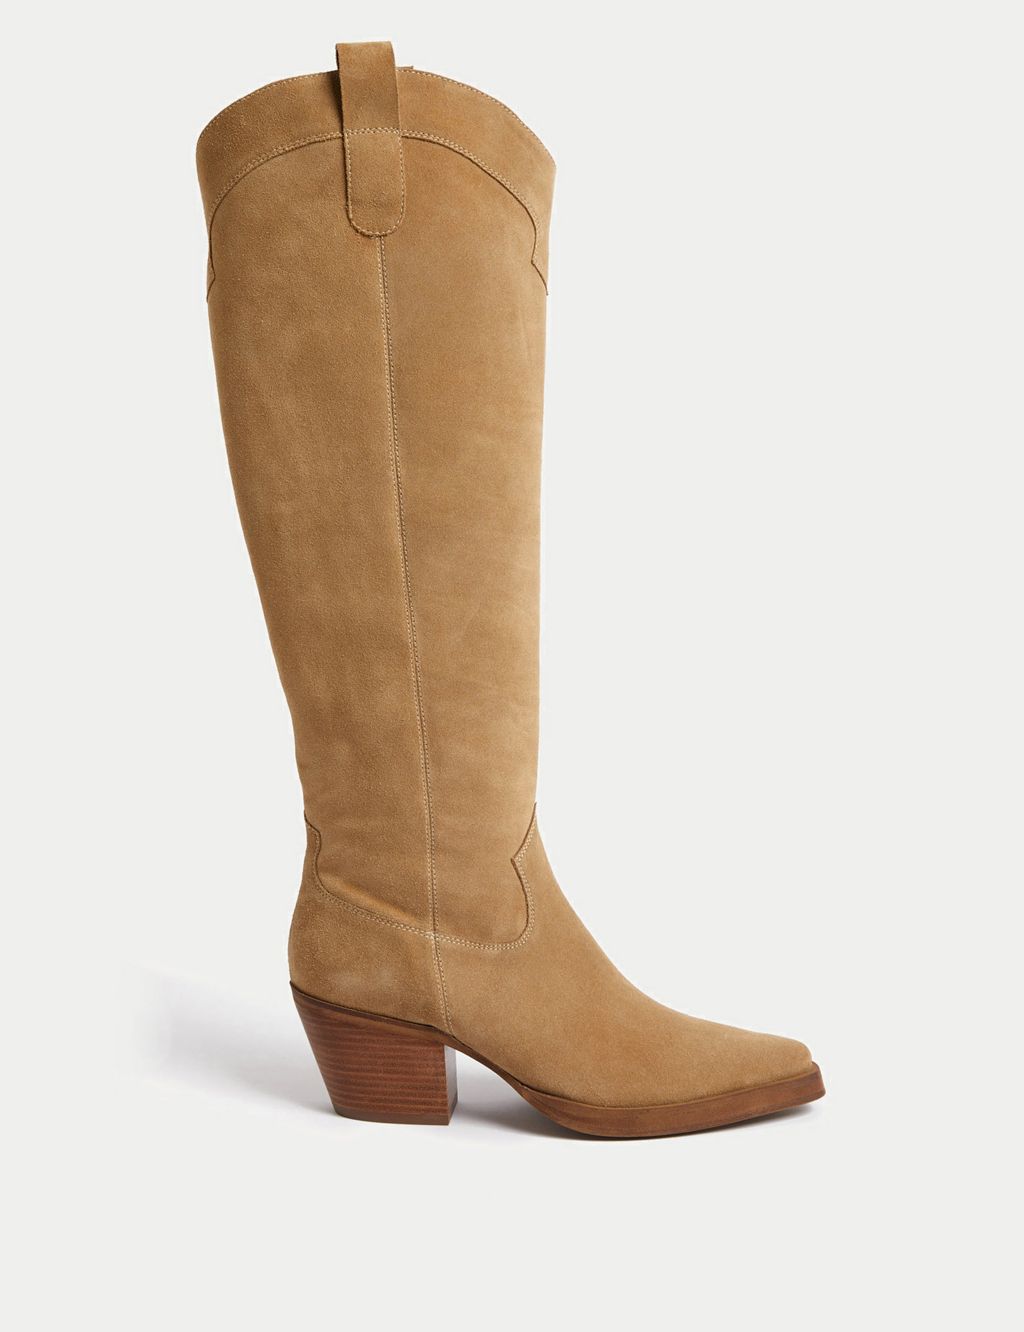 Suede Cow Boy Knee High Boots image 1